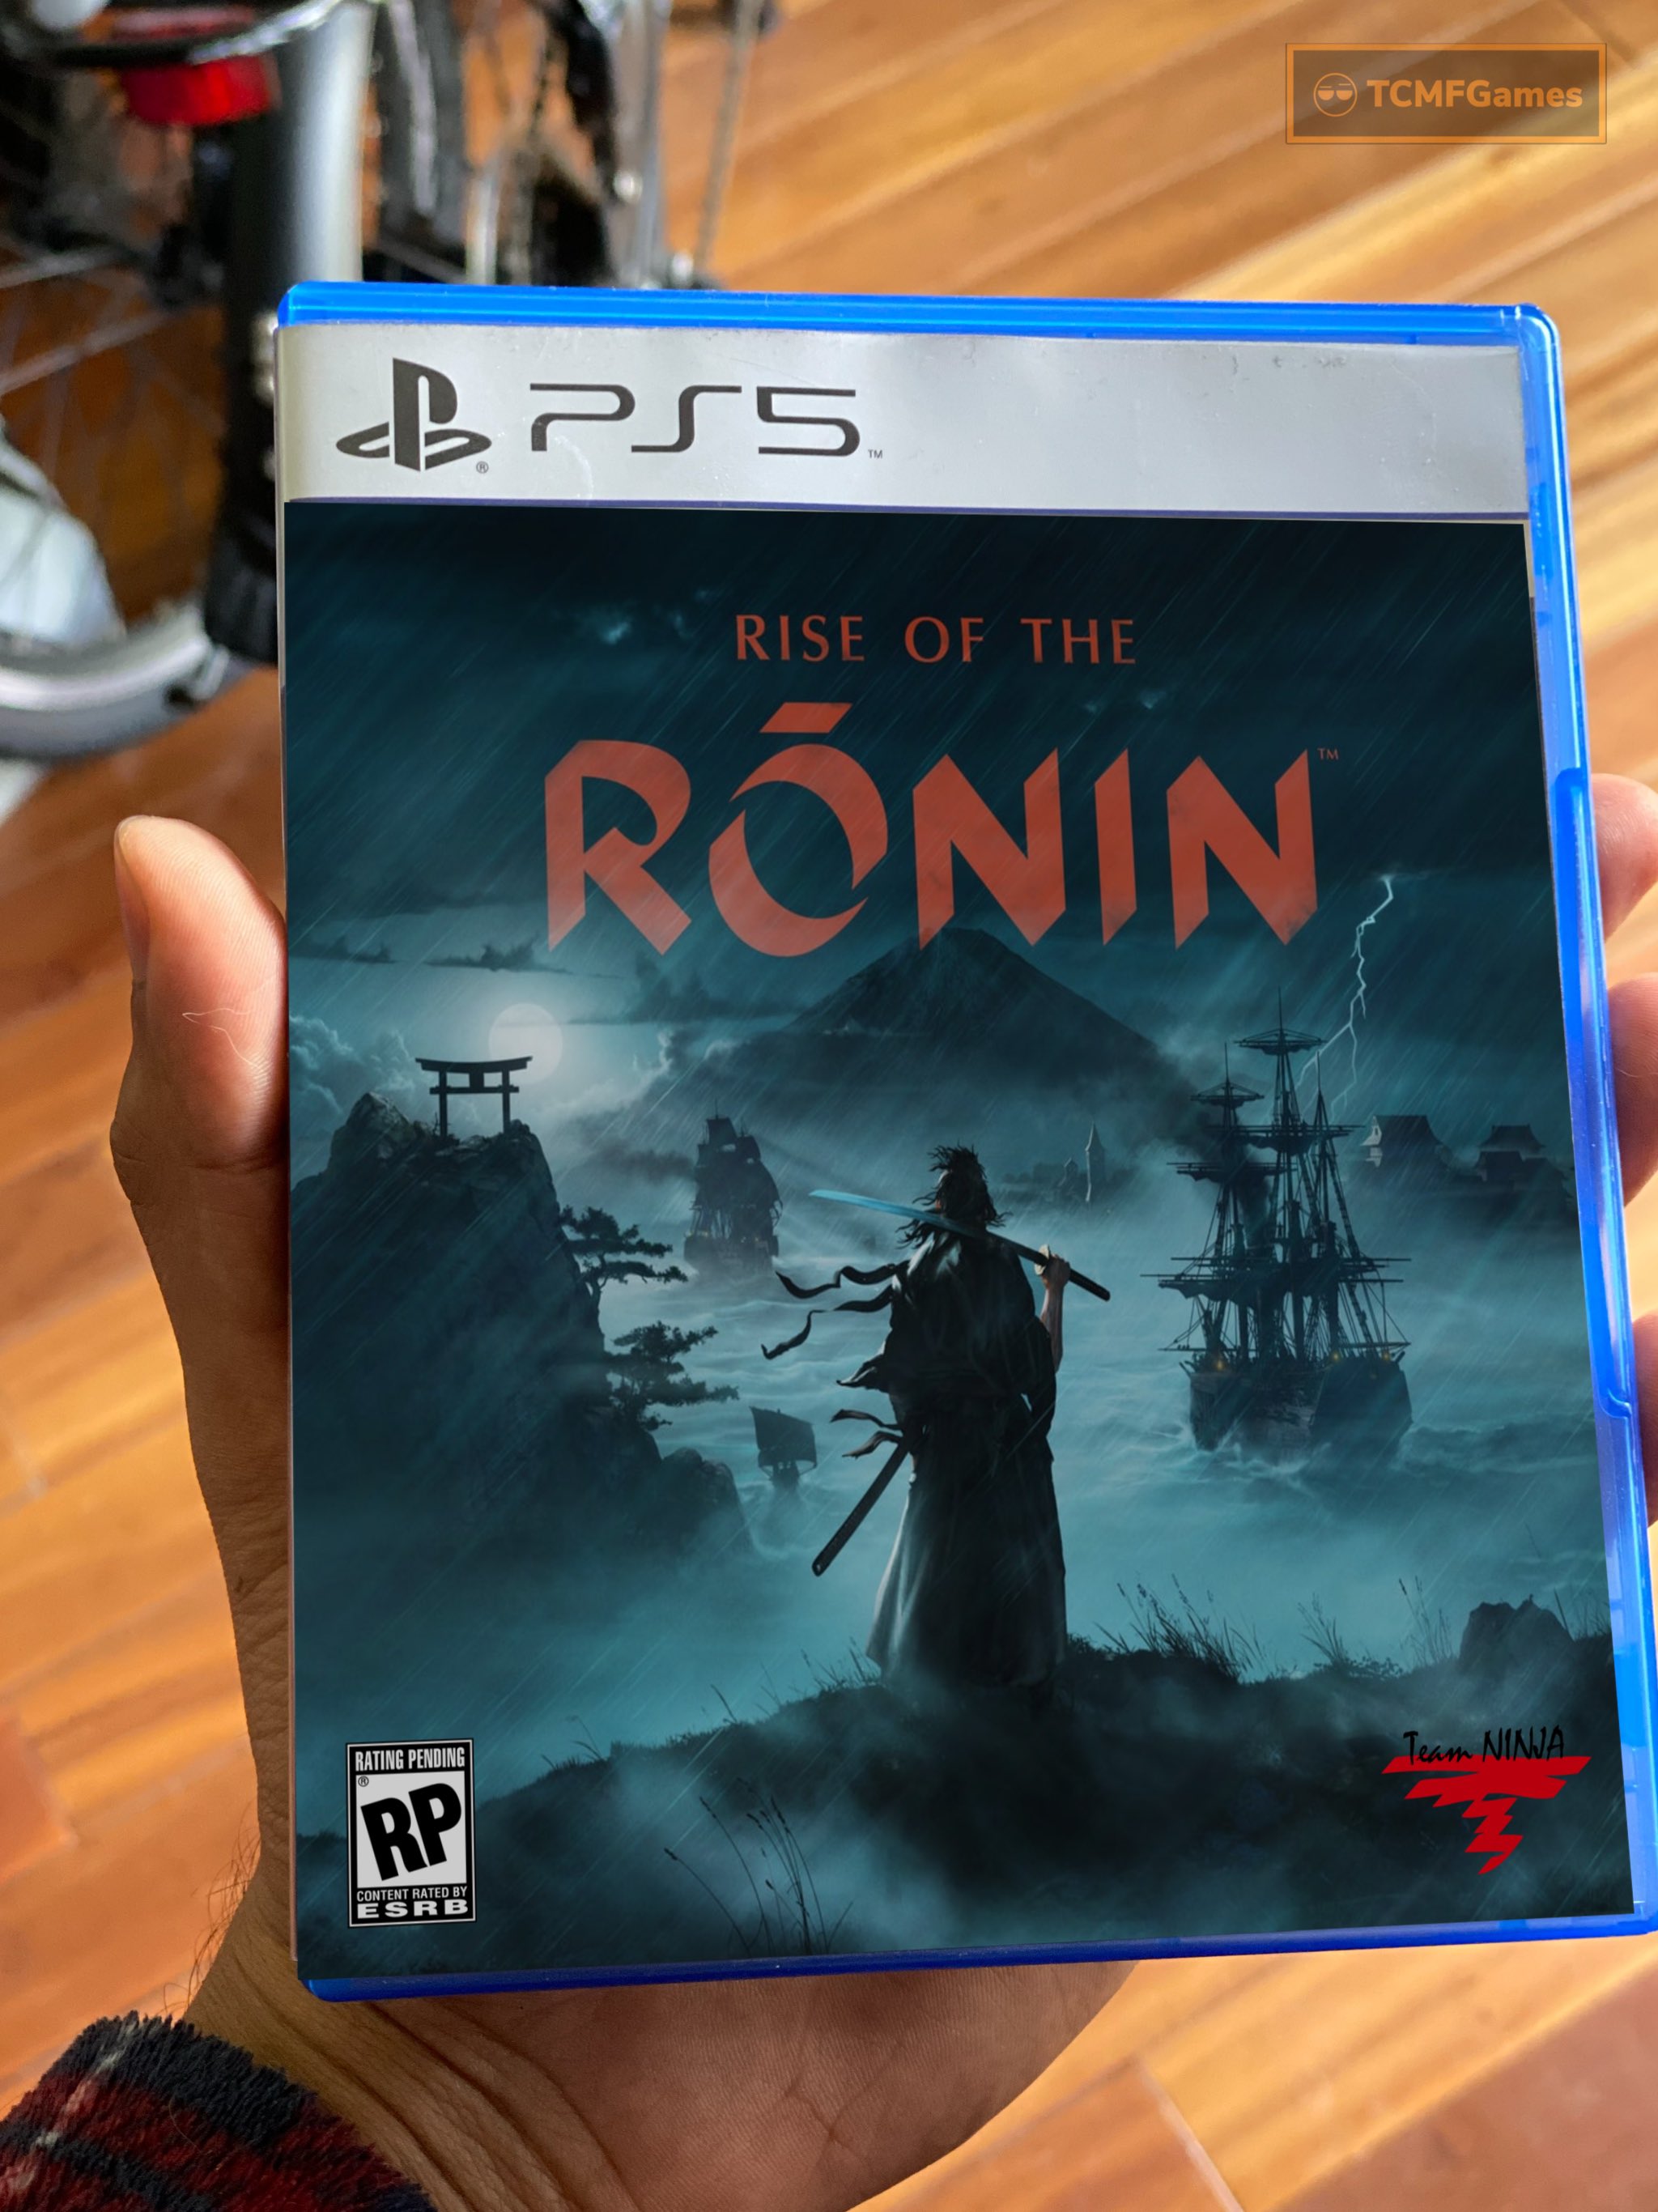 Rise of the Ronin from Team Ninja coming to PS5 in 2024